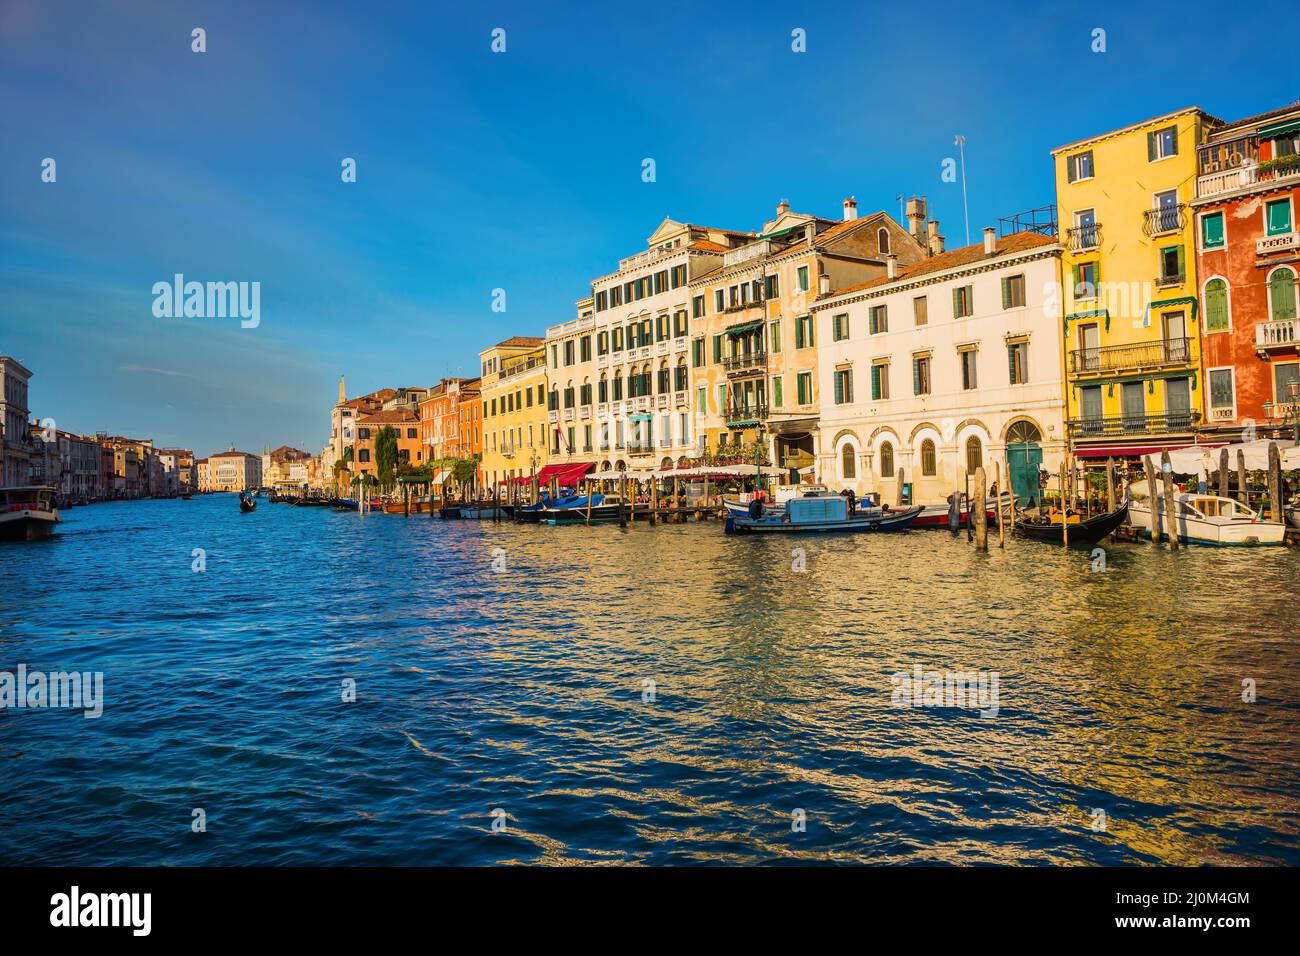 The Grand Canal on a sunny day Stock Photo